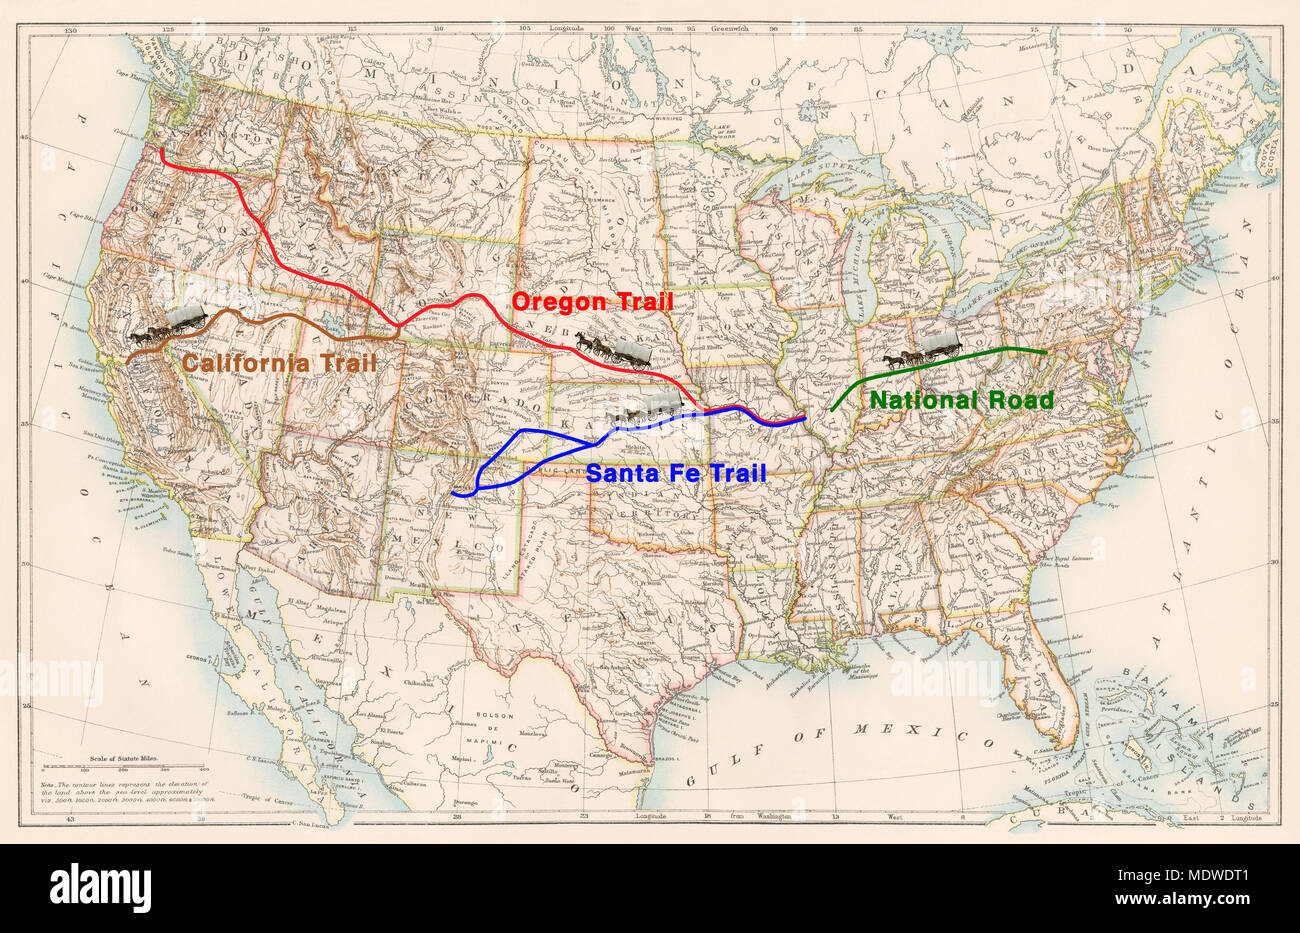 Routes of the great westward trails on an 1870s map of the US. Digital illustration Stock Photo